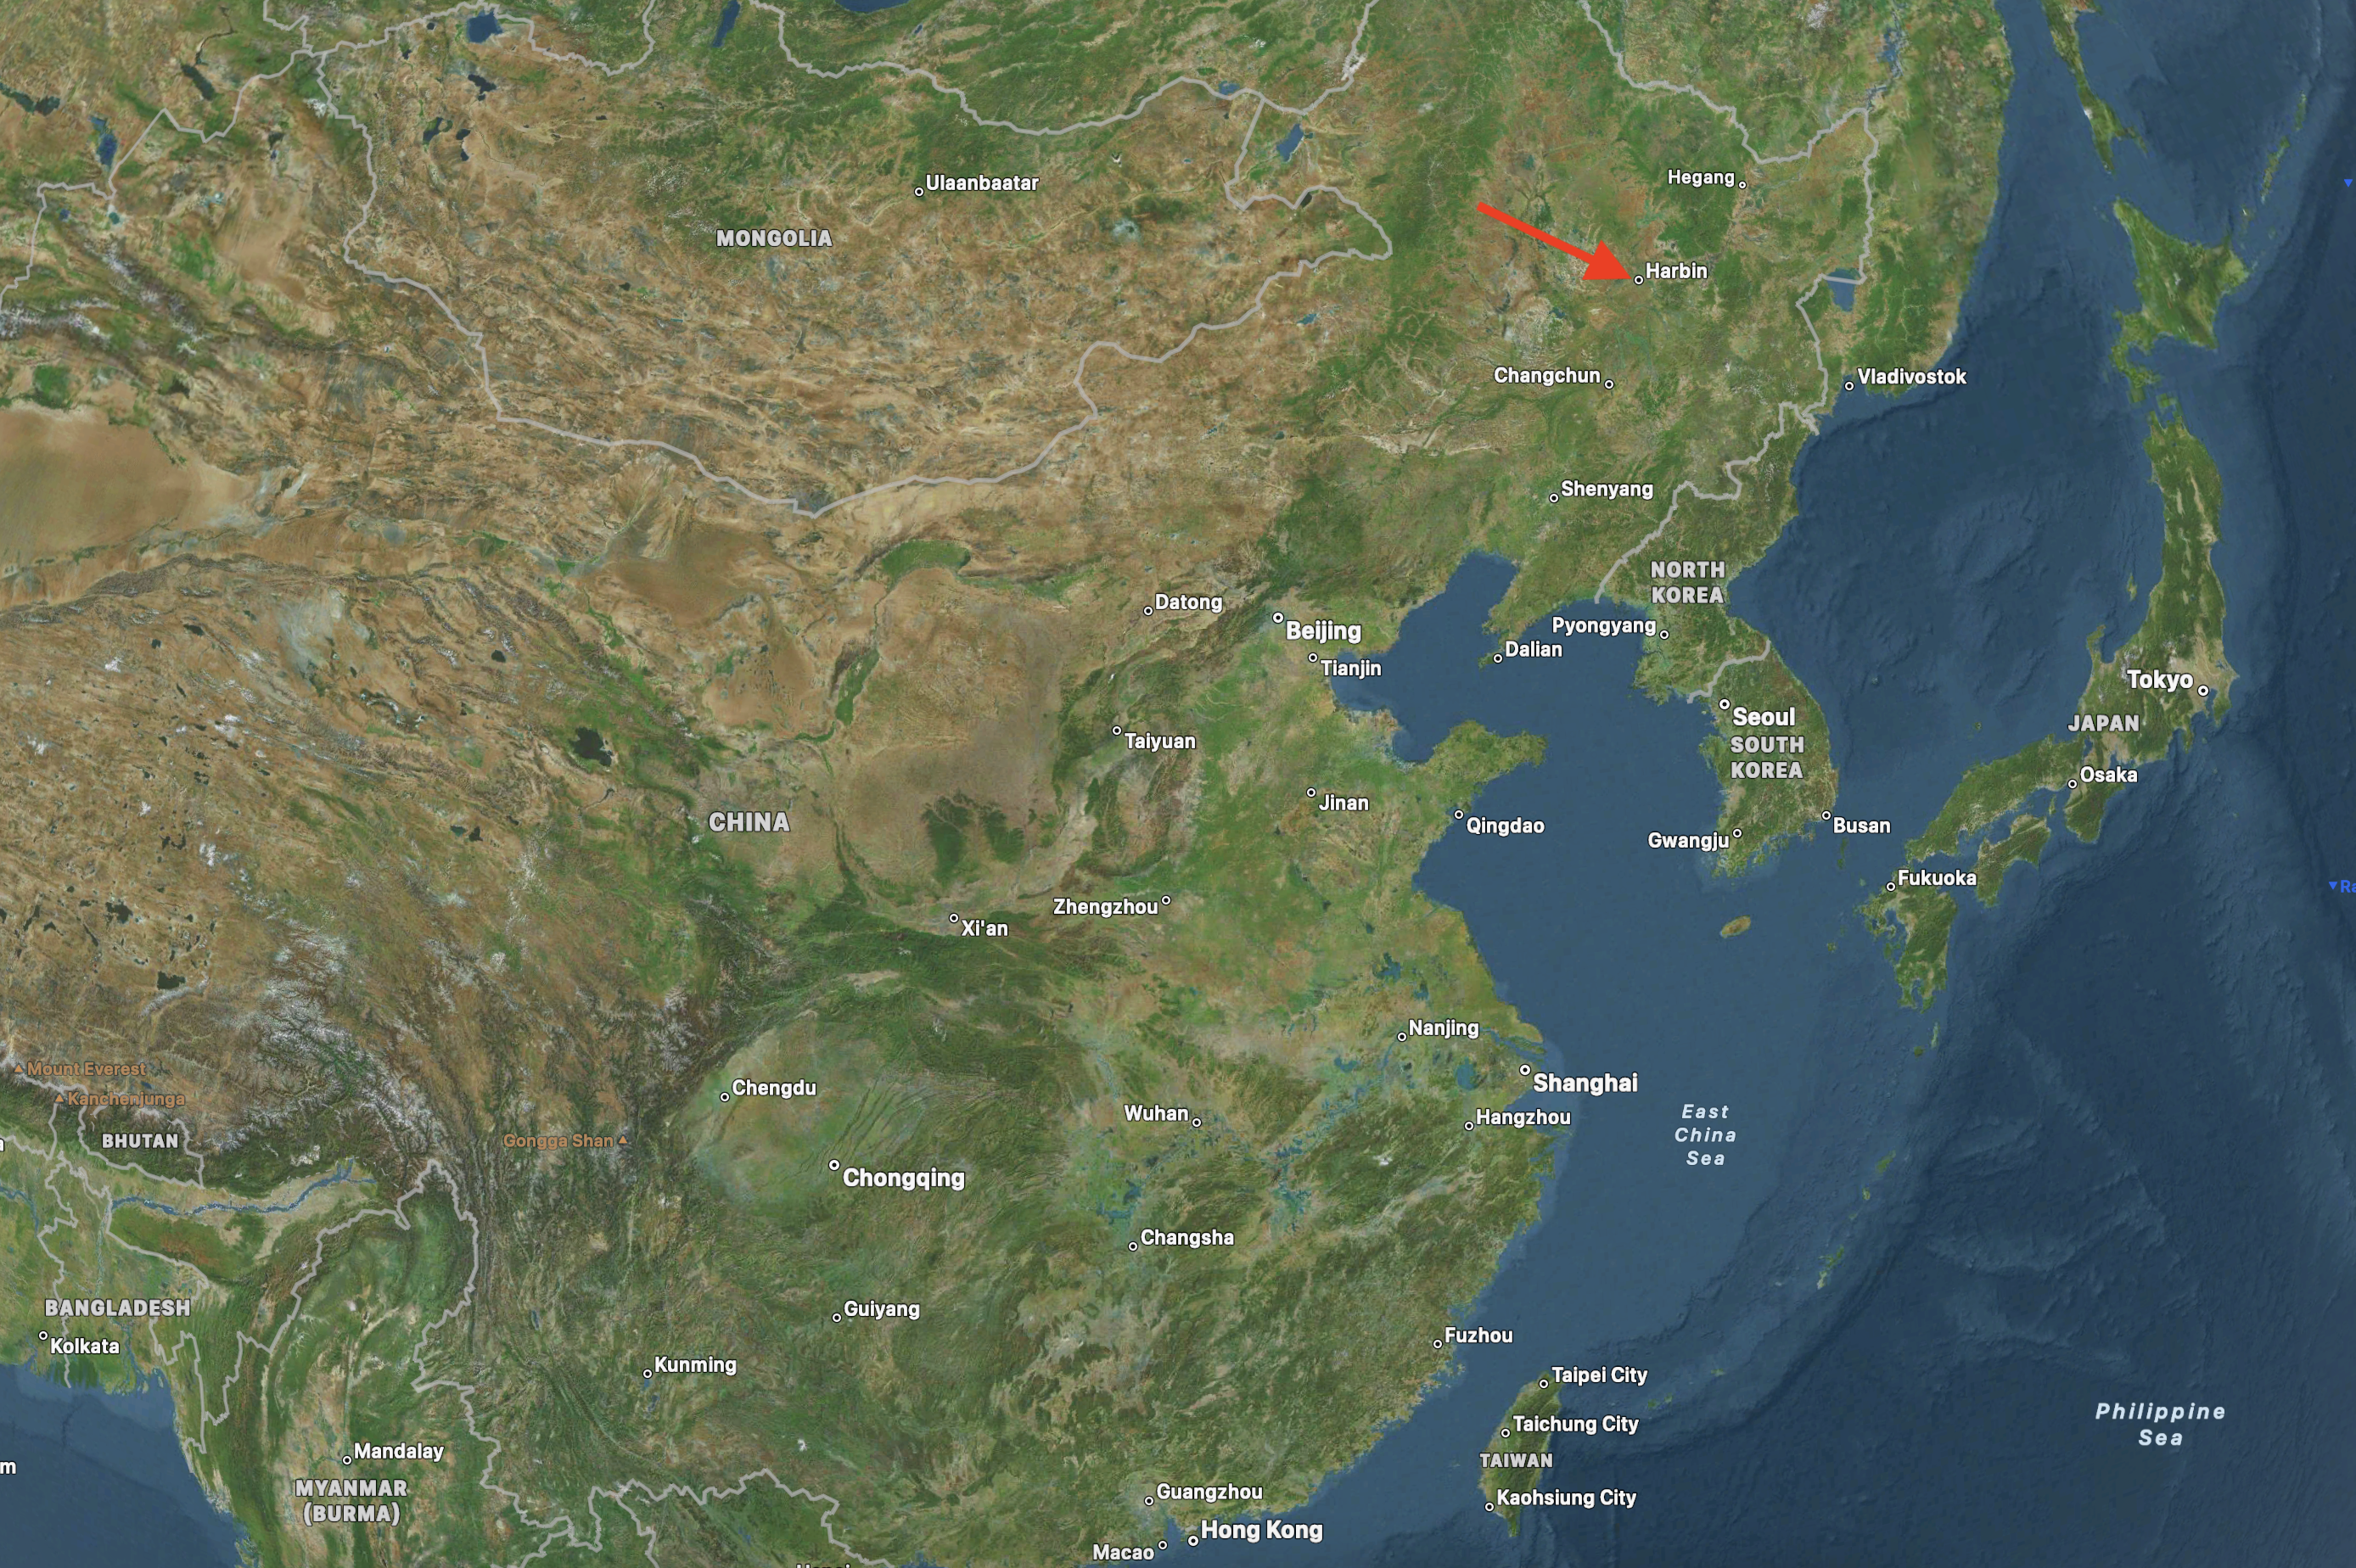 A satellite map zoomed out to see most of china. Harbin is circled in the far northeast.